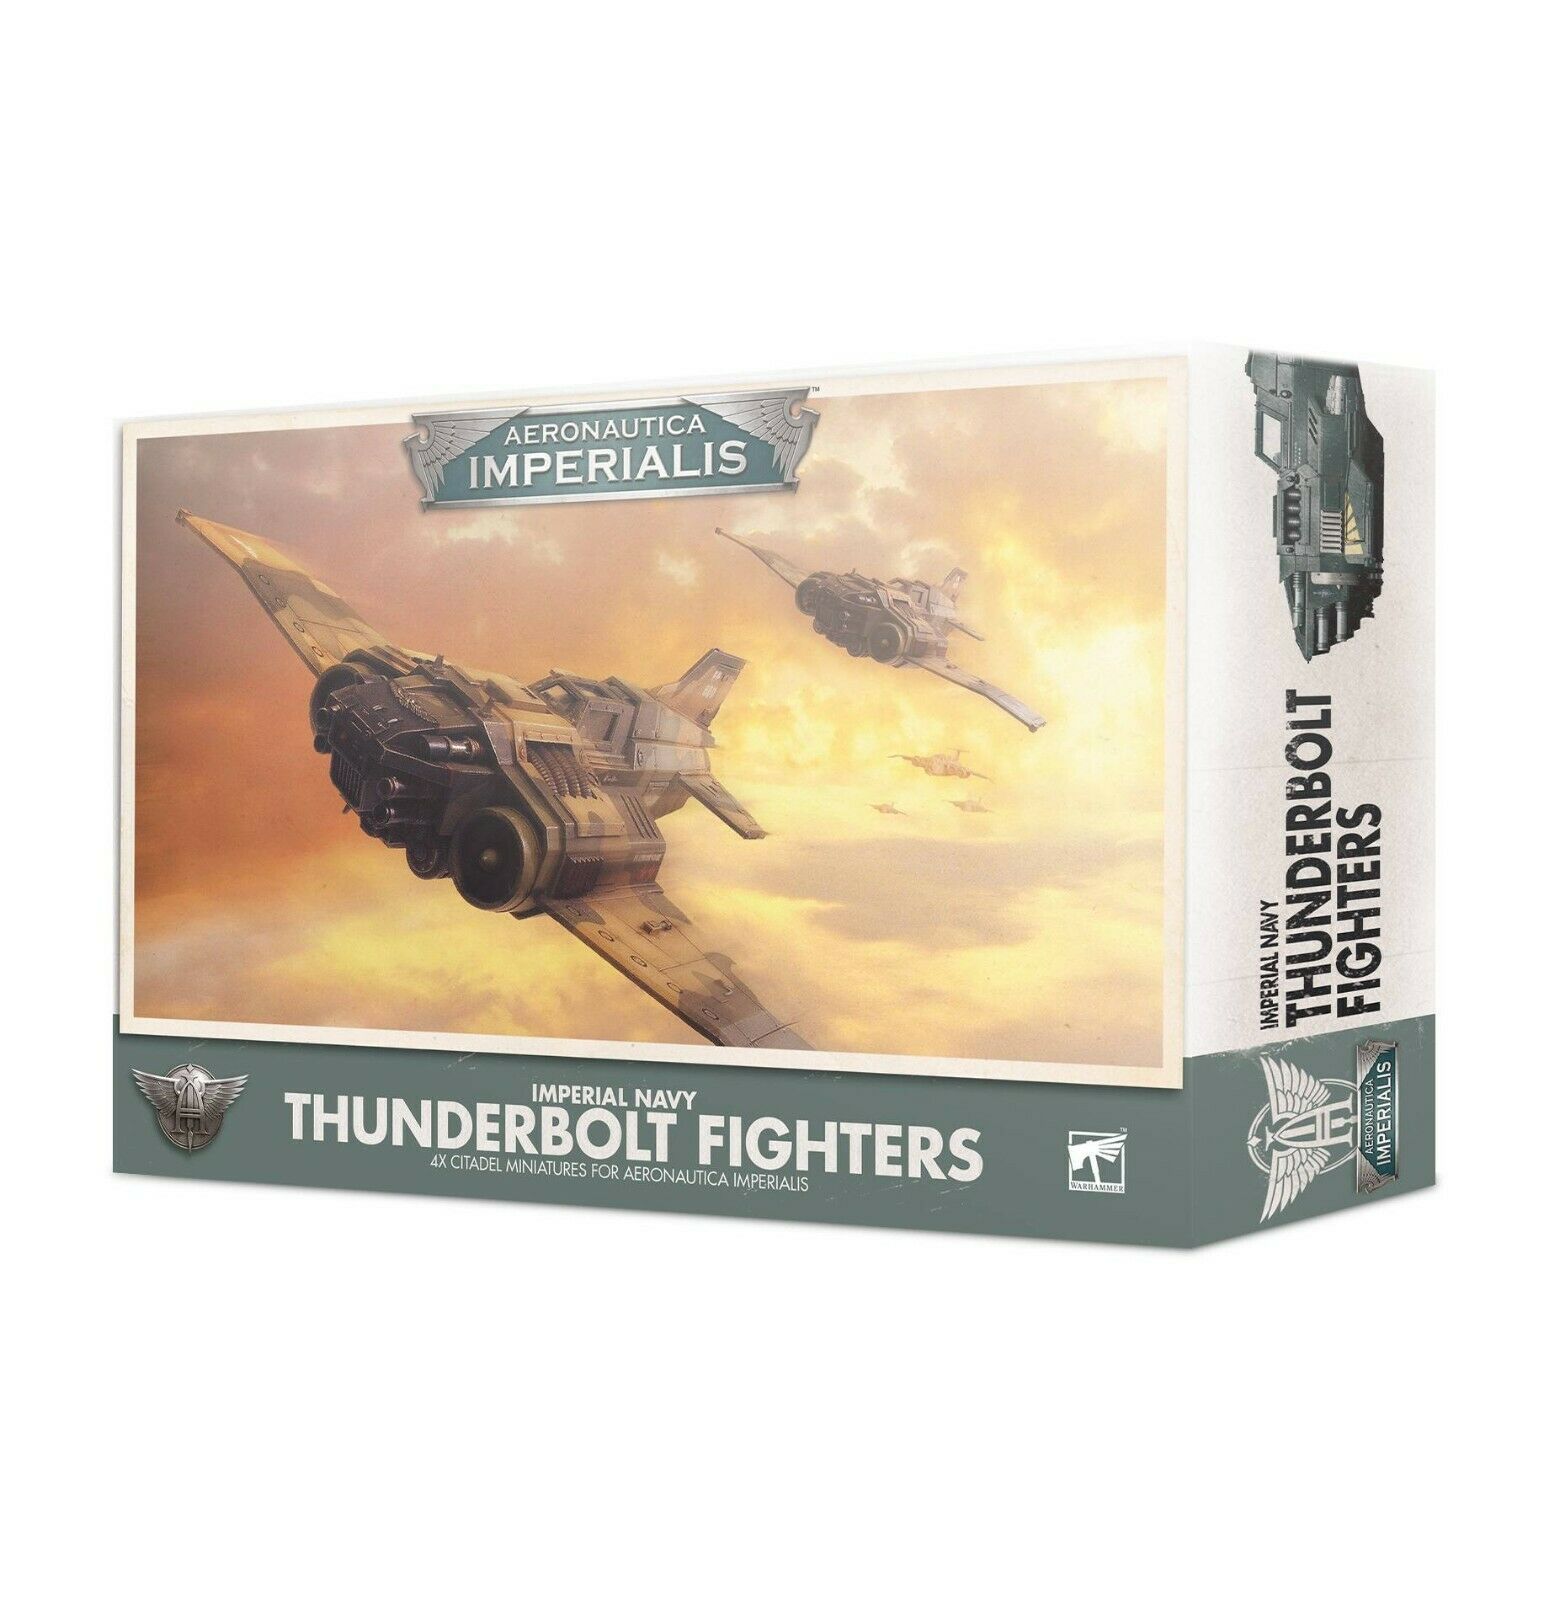 Discount Aeronautica Imperialis Imperial Navy Thunderbolt Fighters - West Coast Games